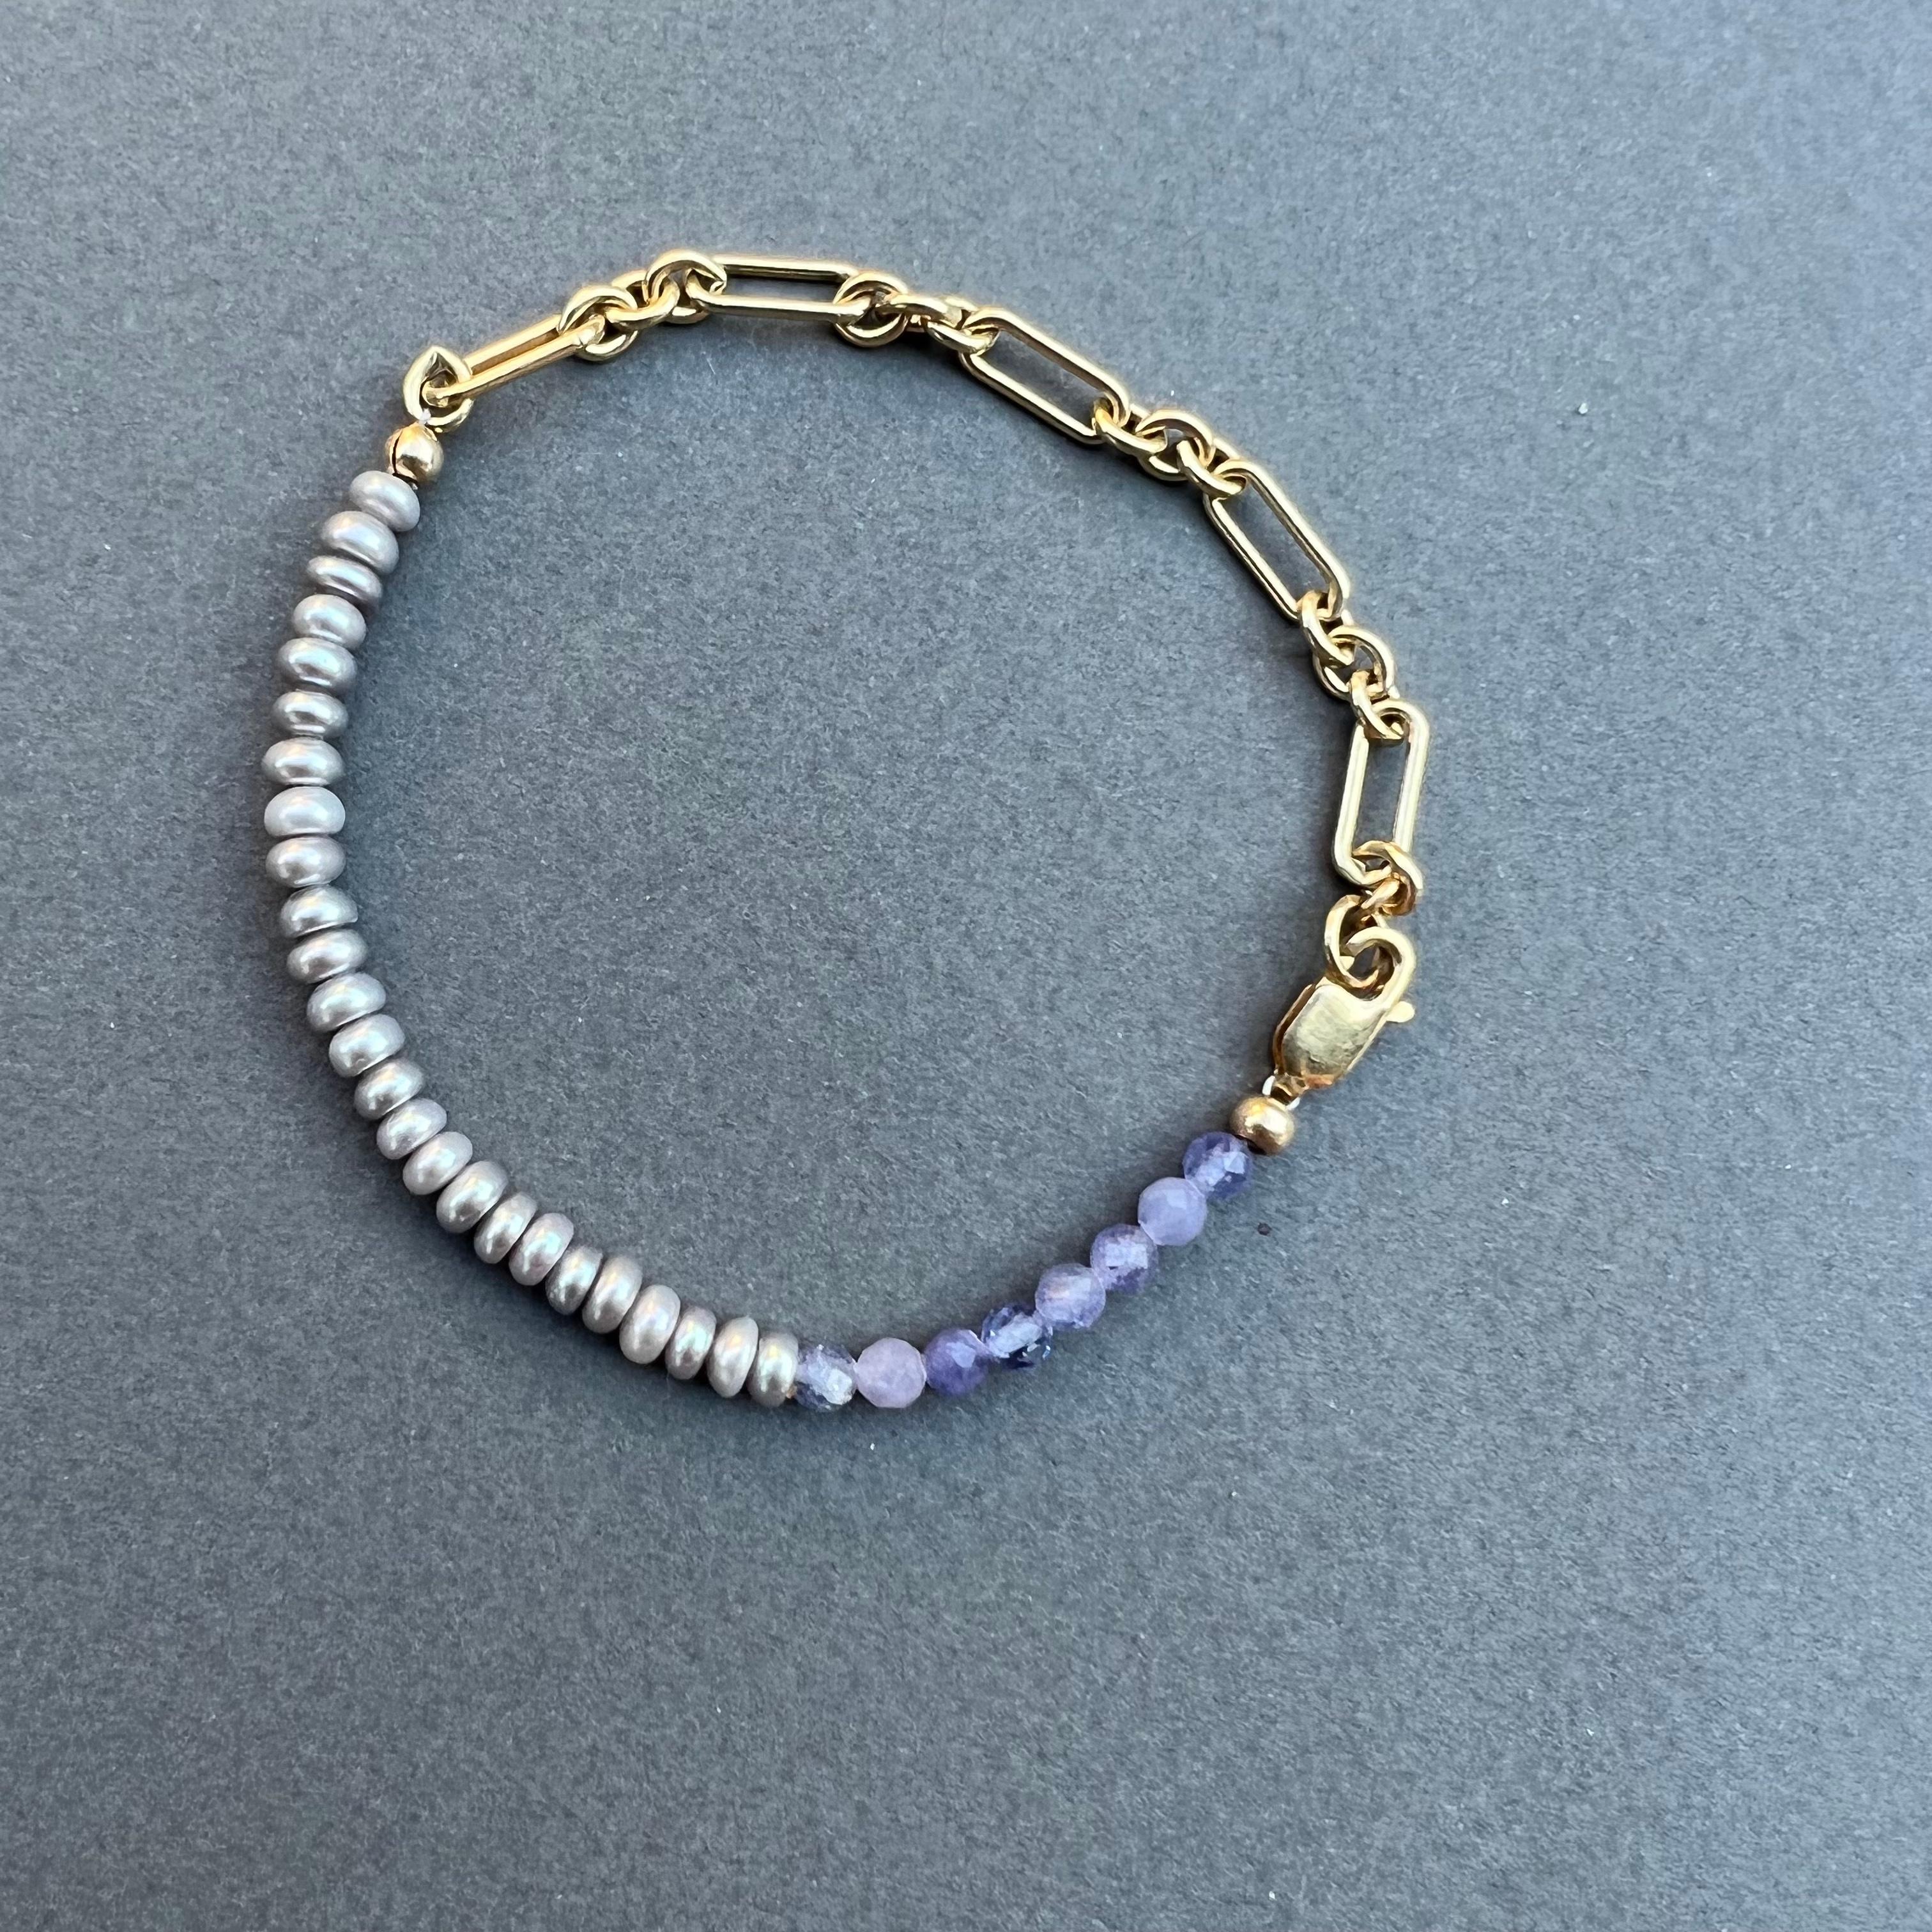 Pearl Tanzanite Ankle Bracelet Beaded Gold Filled Chain J Dauphin 2